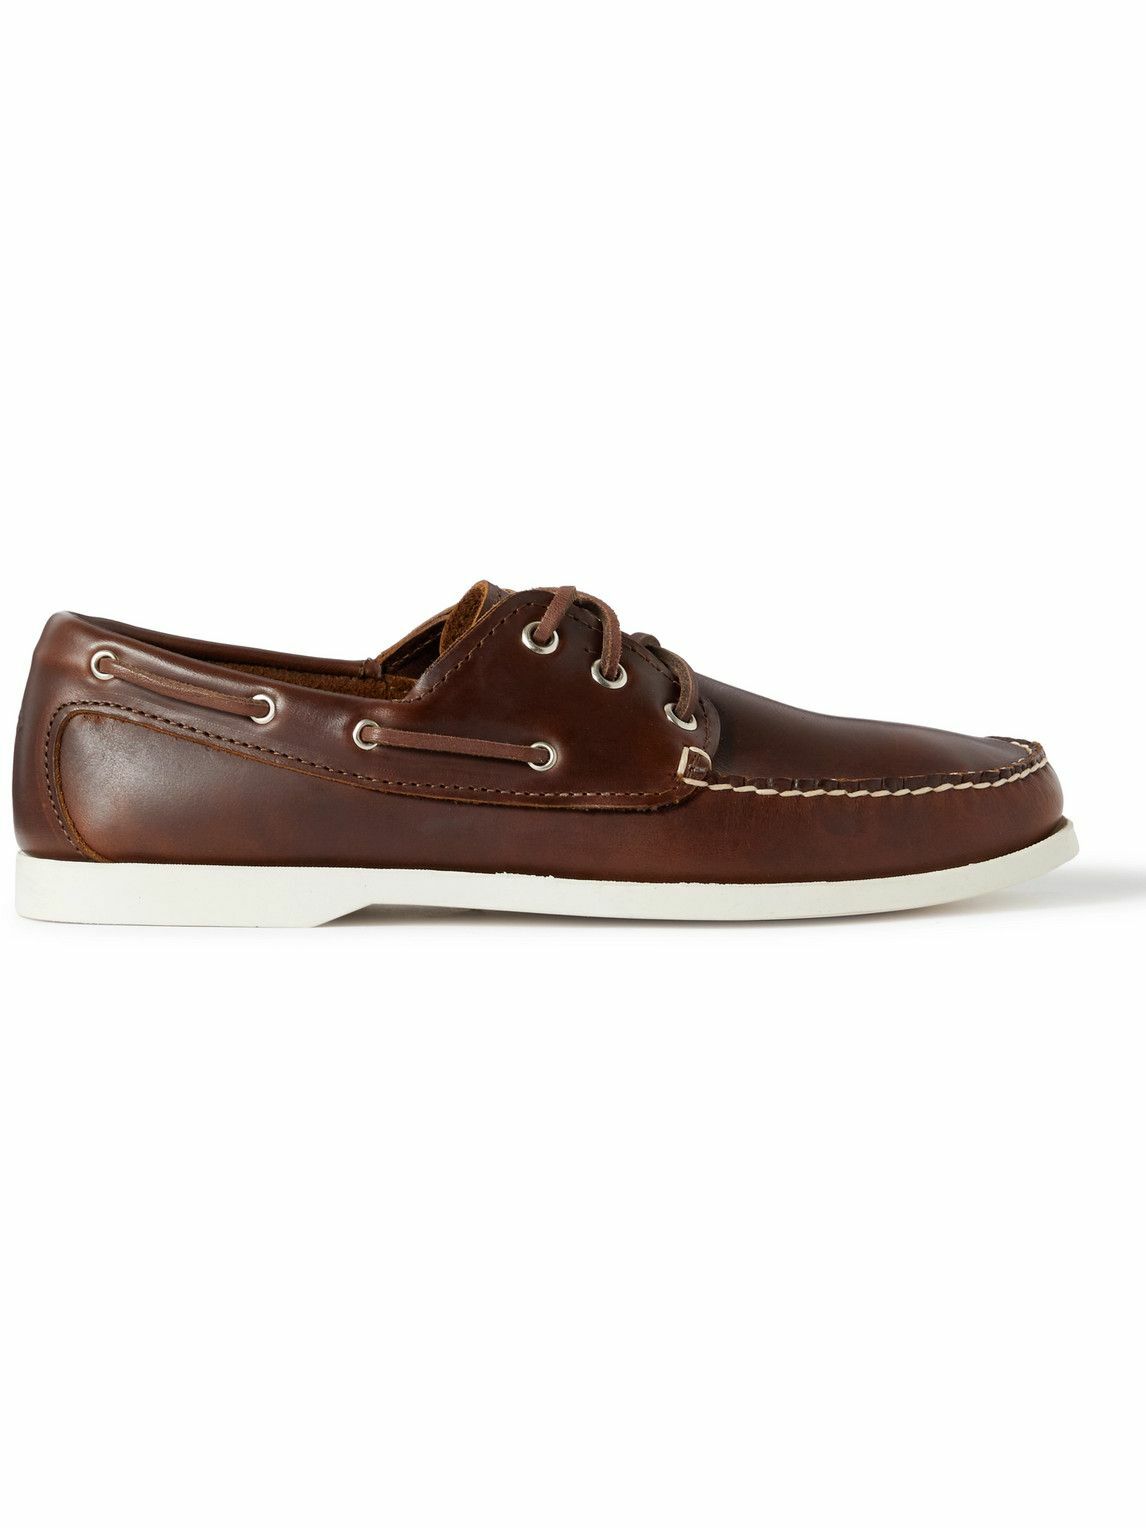 Leather Boat Shoes - Brown Quoddy